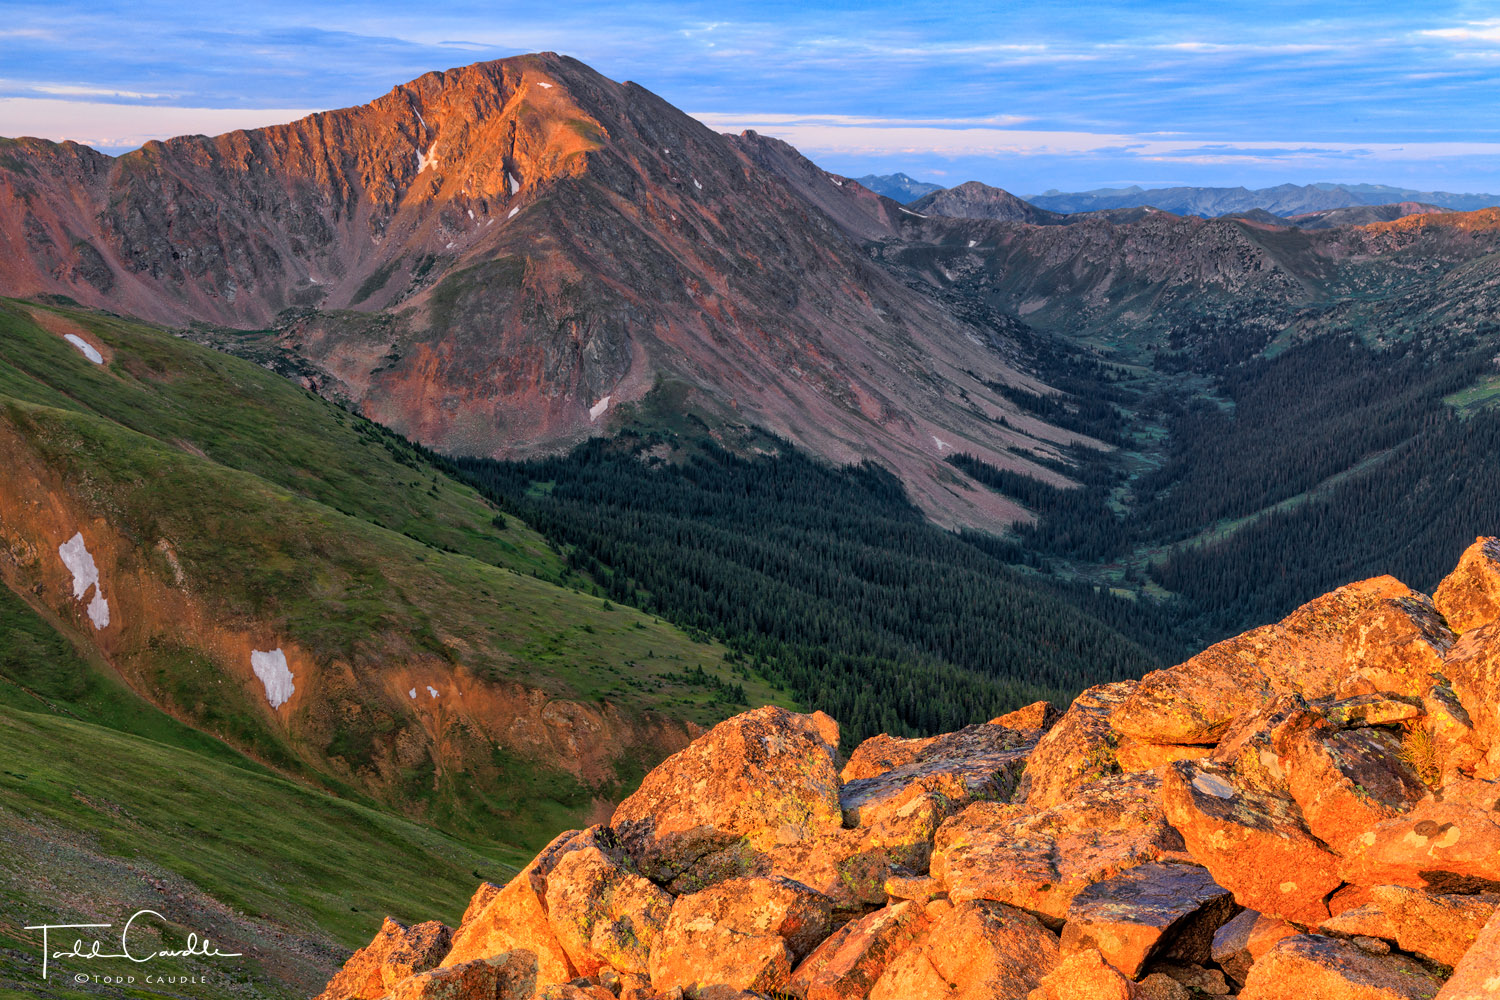 Pettingell Peak catches the first rays of sunrise on Colorado Day, the holiday that celebrates Colorado's entry into the union...